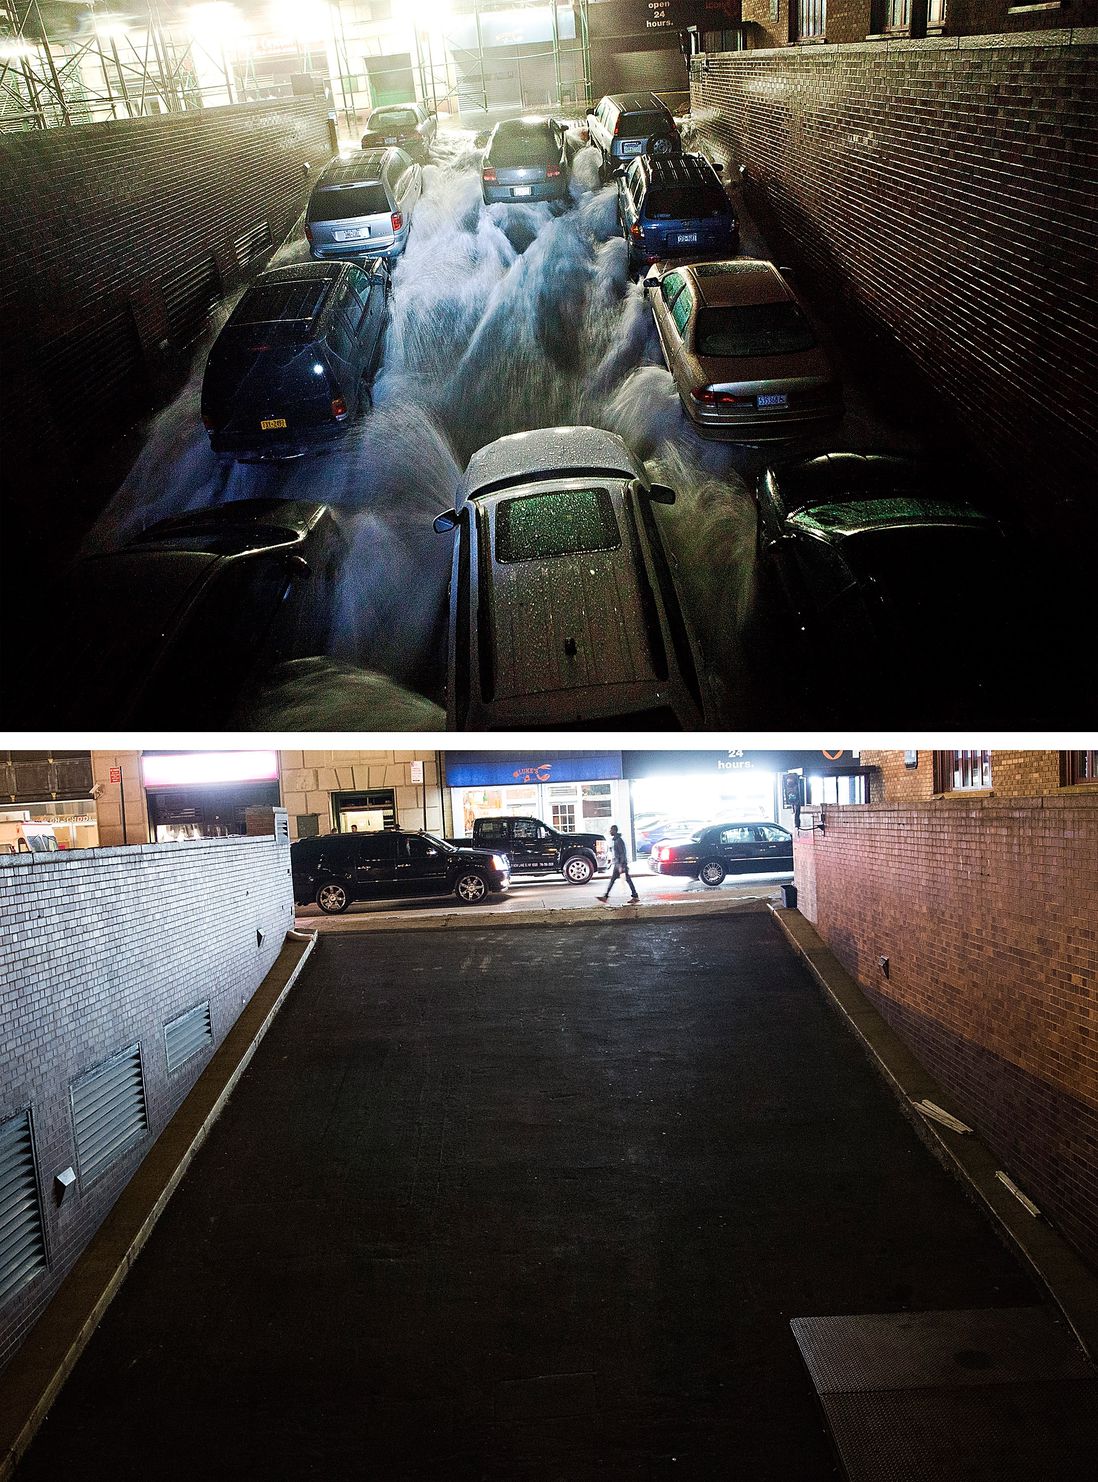 [Top] Rising water caused by Superstorm Sandy rushes into a parking garage on October 29, 2012 in New York City. [Bottom] Traffic drives past the garage (which is in use again) October 22, 2013 in New York City.